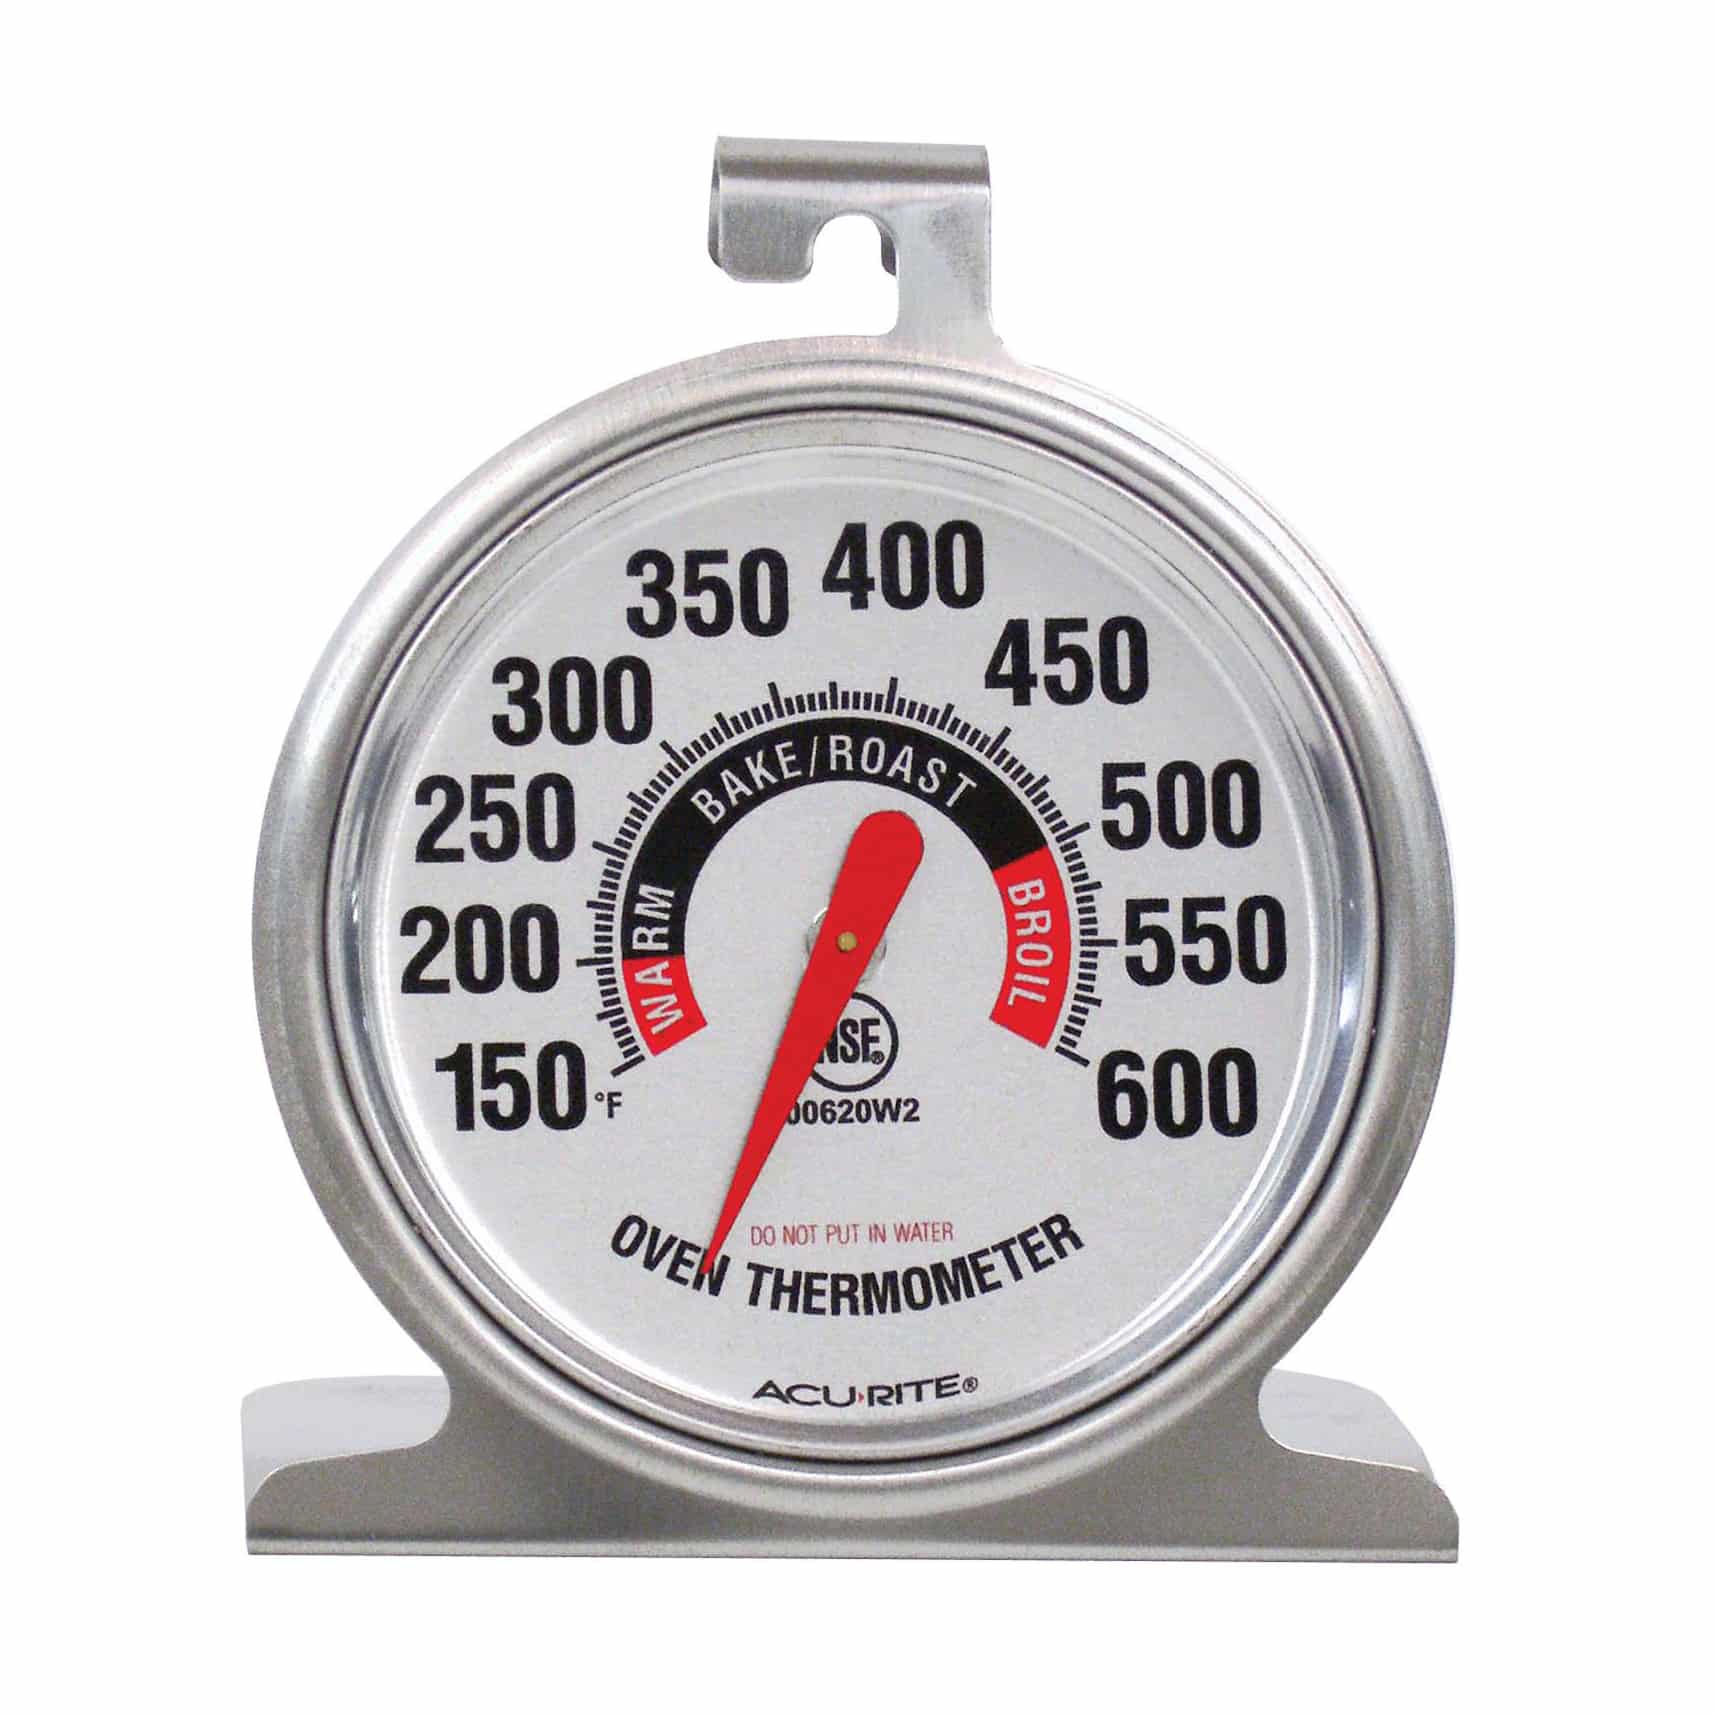 4. AcuRite Stainless Steel Oven Thermometer 